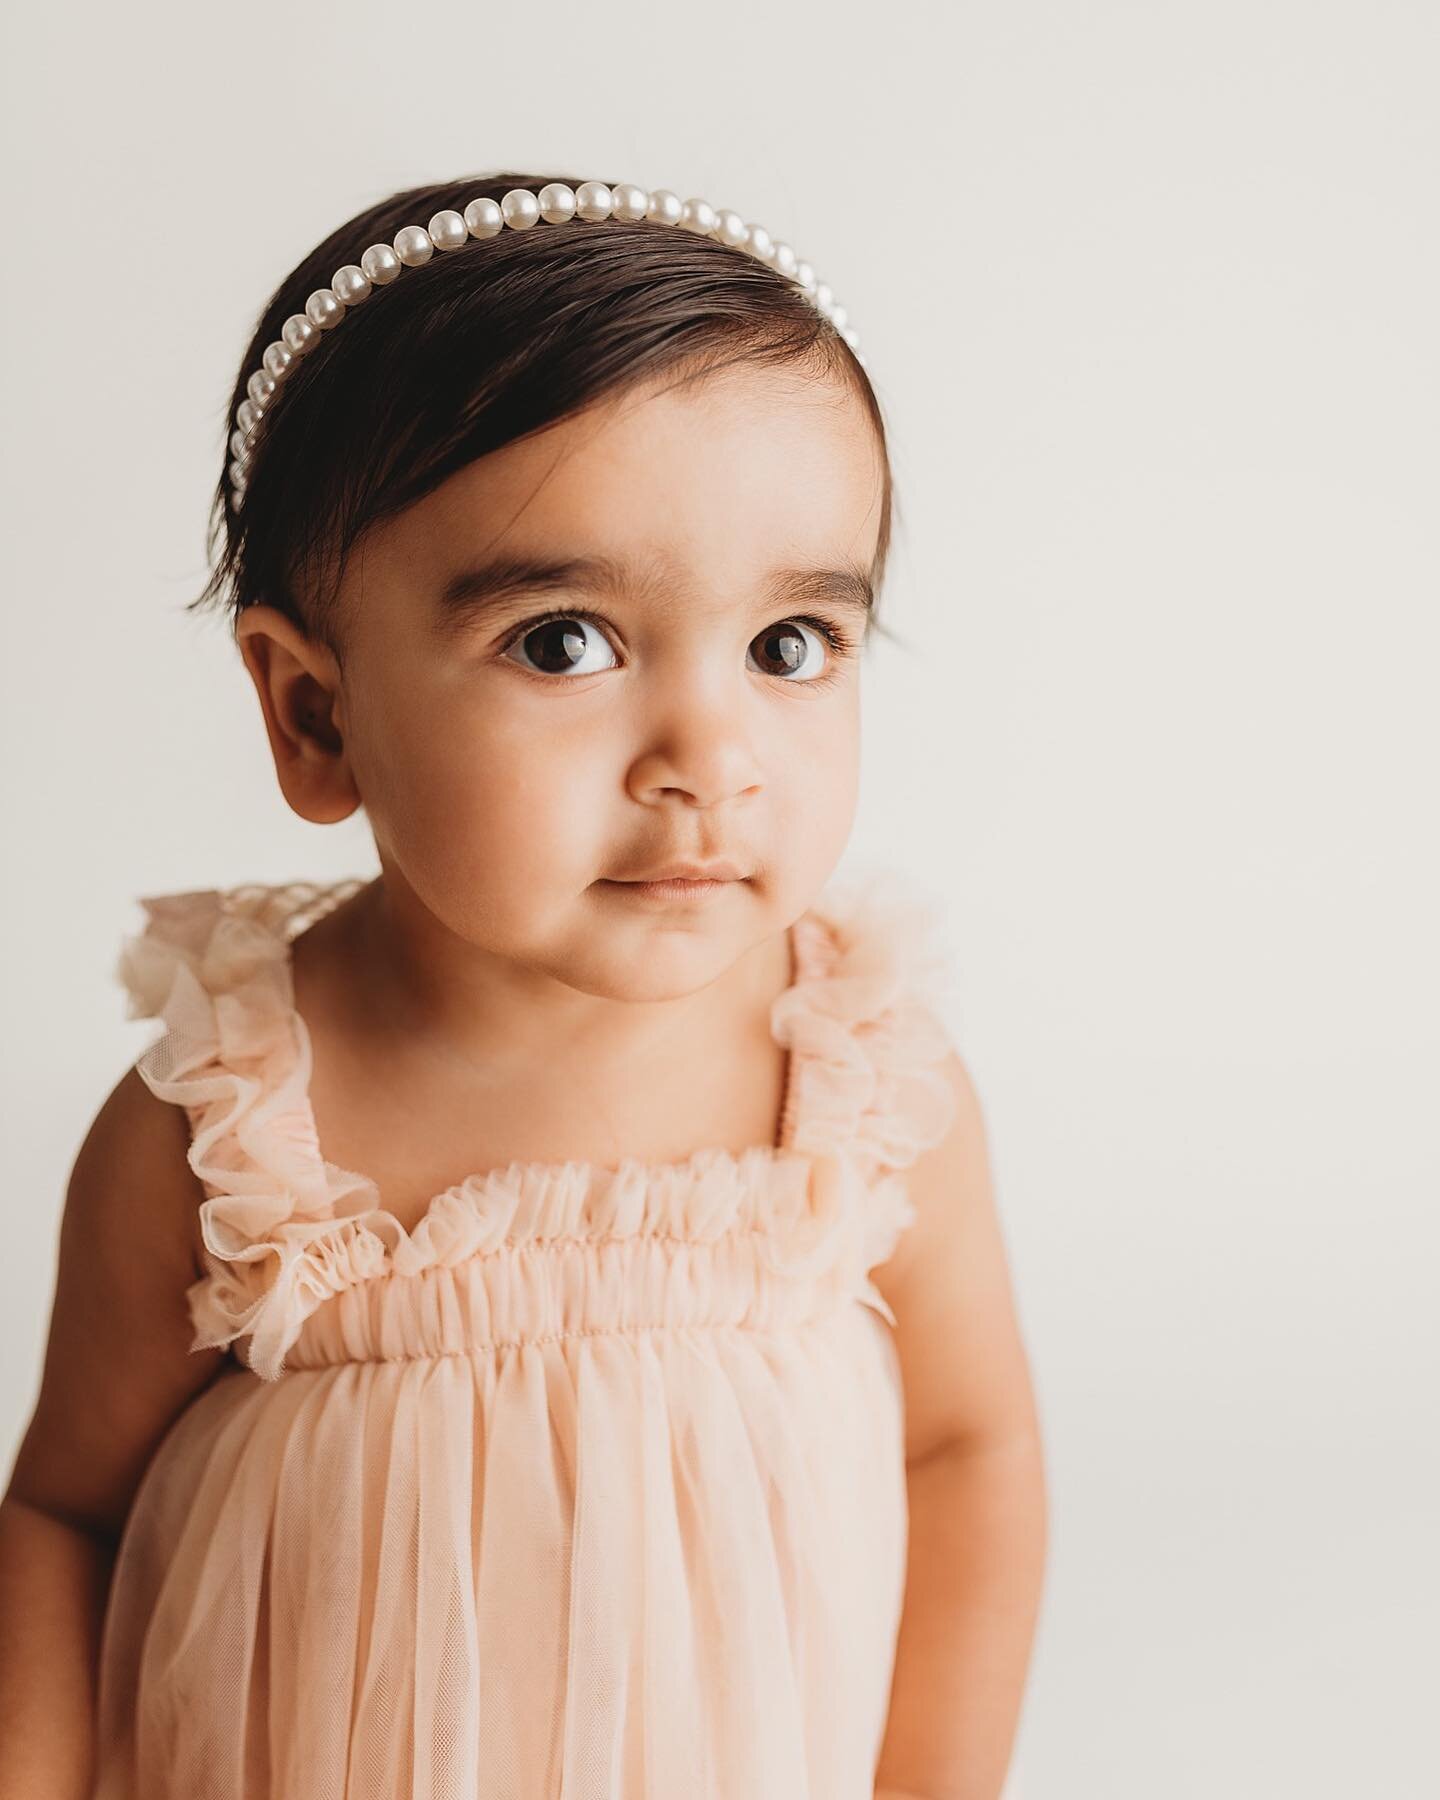 I can&rsquo;t believe this sweet girl is already ONE!! Such a fun shoot! She wouldn&rsquo;t allow for not even one prop, but that&rsquo;s ok&hellip; she stole the show all on her own!